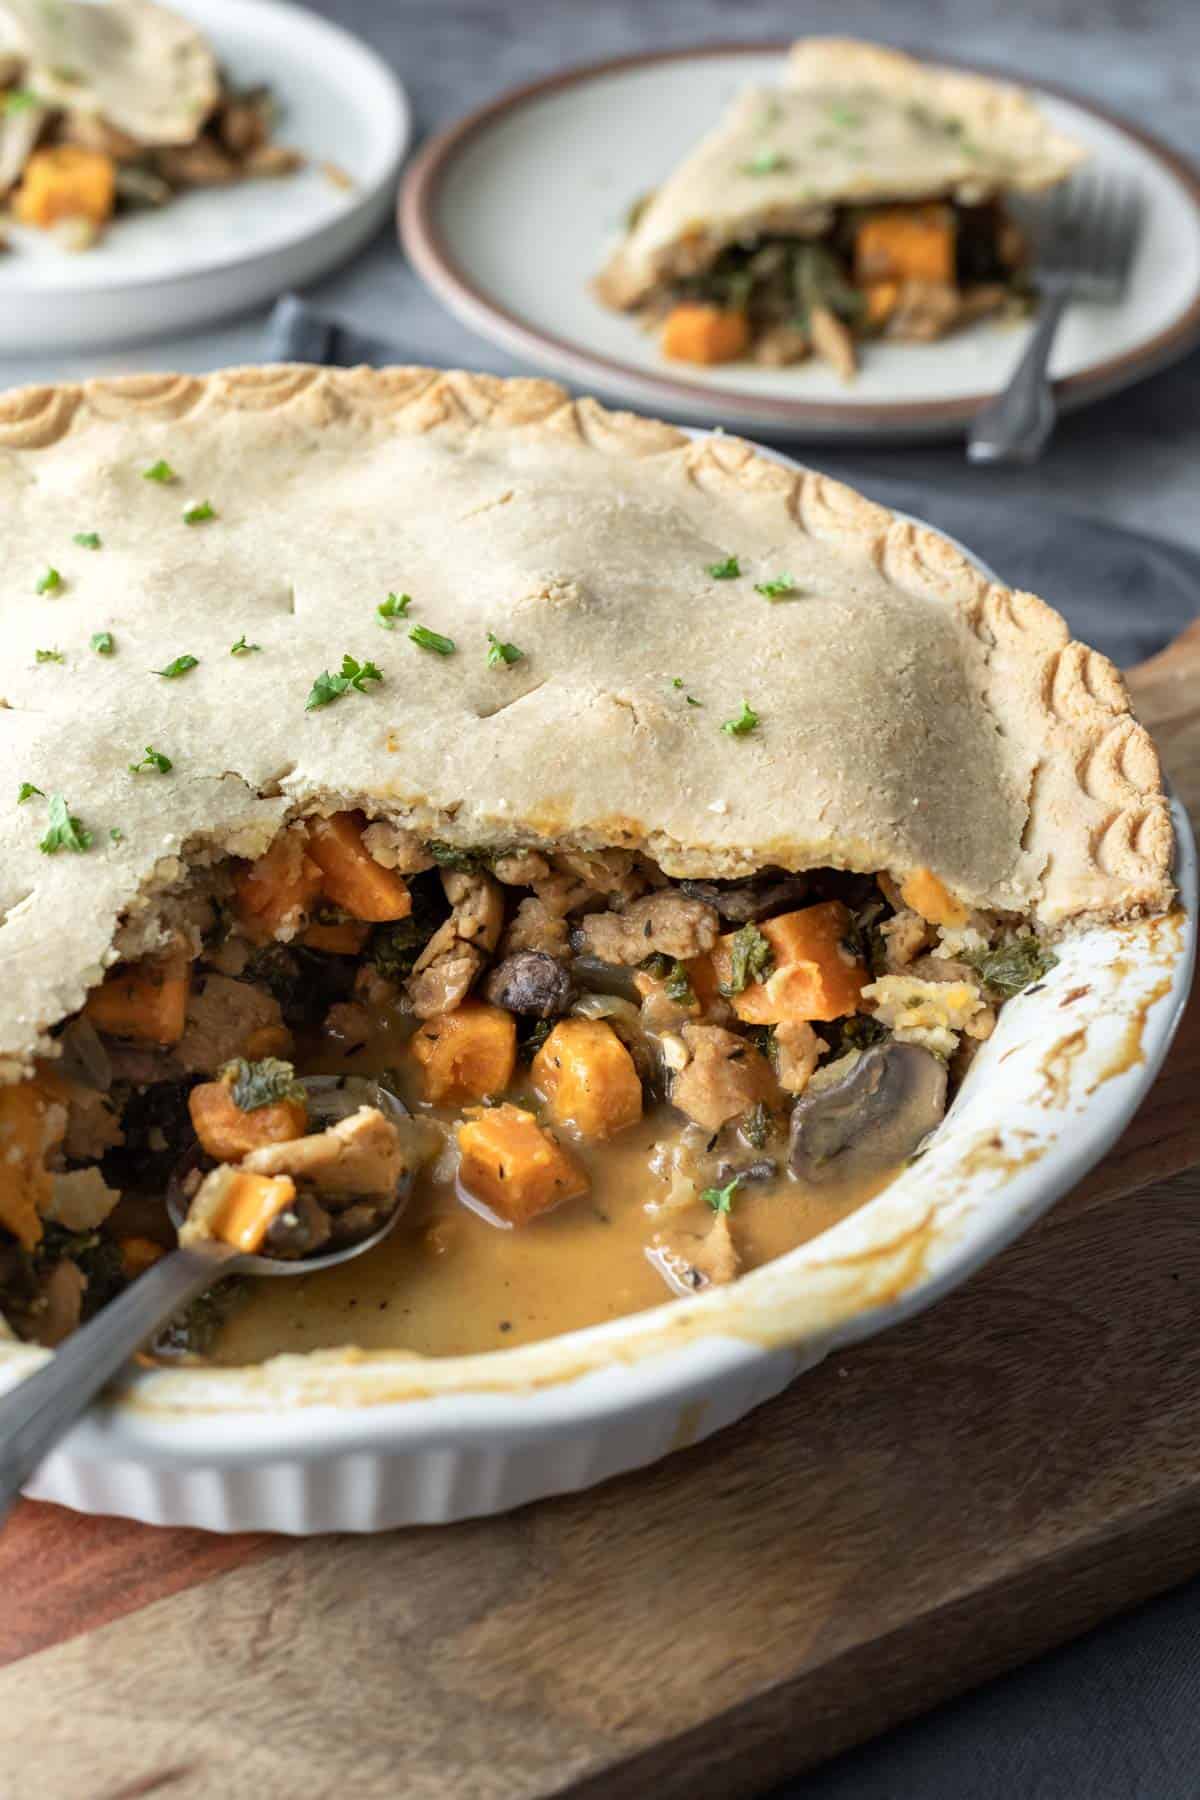 Veggie pot pie with several servings removed showing the chunky texture inside.